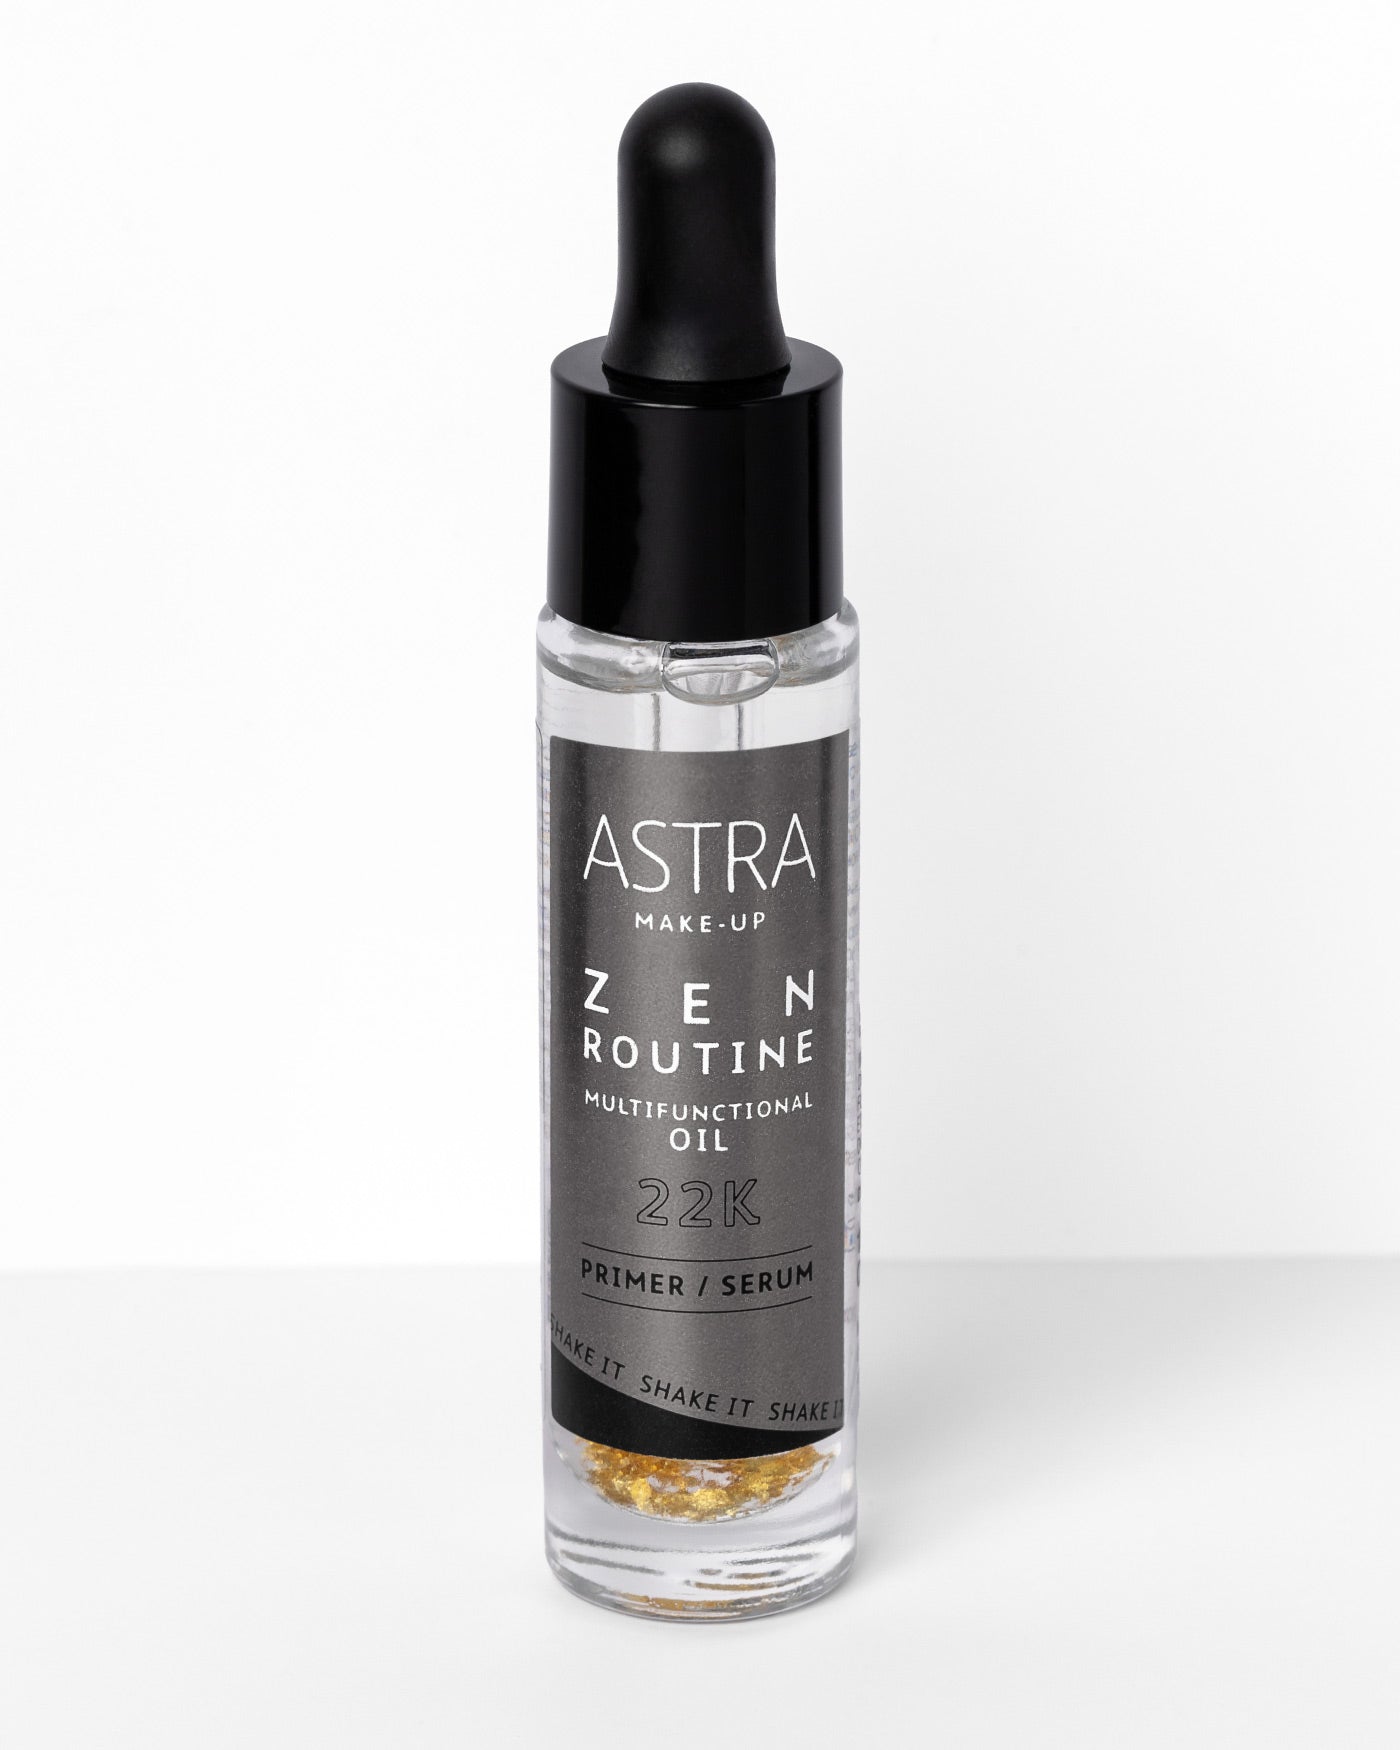 ZEN ROUTINE MULTIFUNCTIONAL OIL - All Products - Astra Make-Up